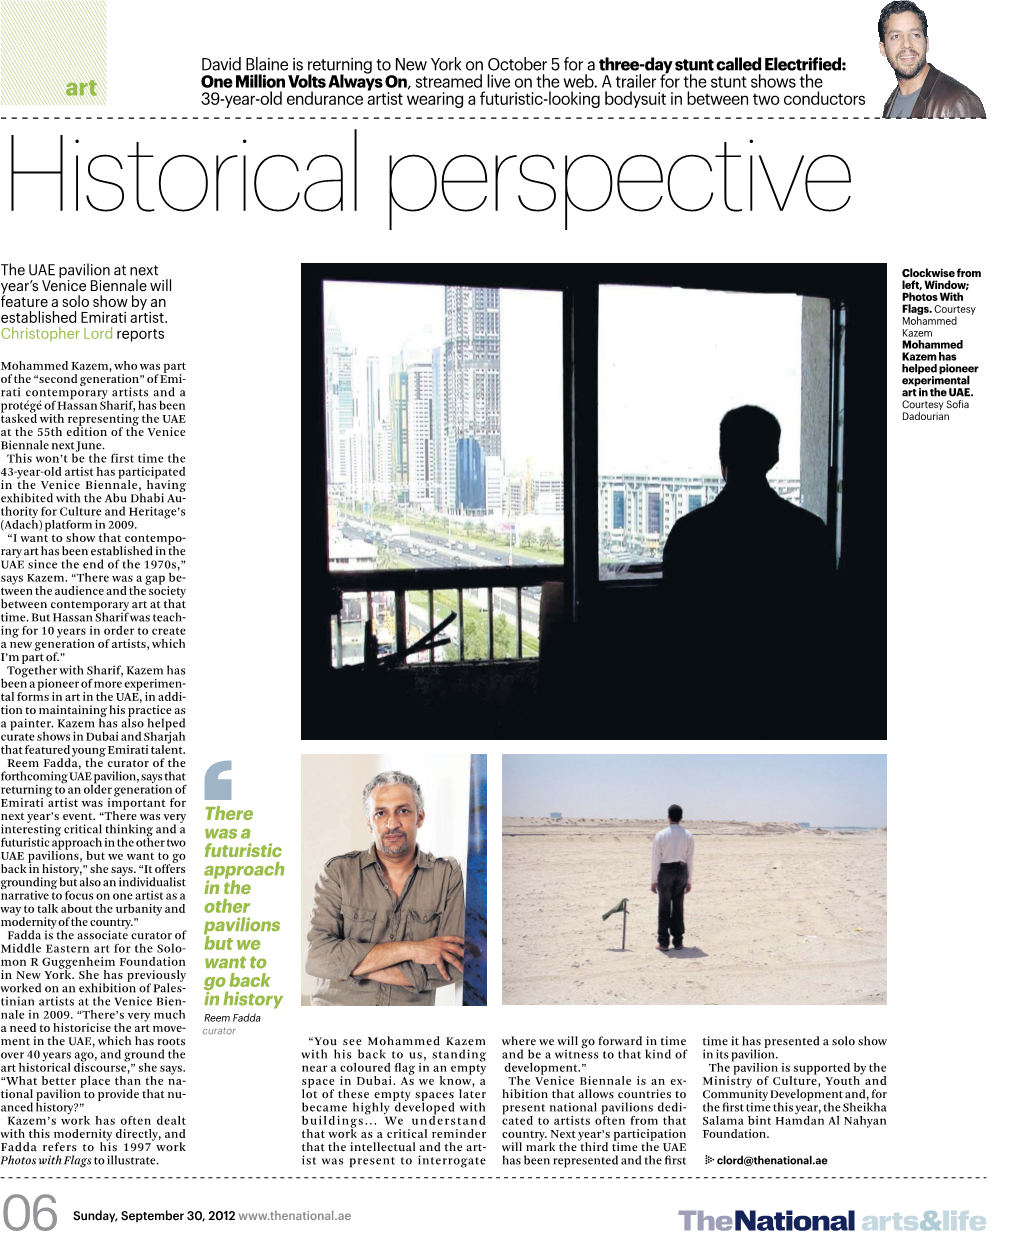 Historical Perspective It Is Strangely Scary, Comforting and at the Same Time Fascinating